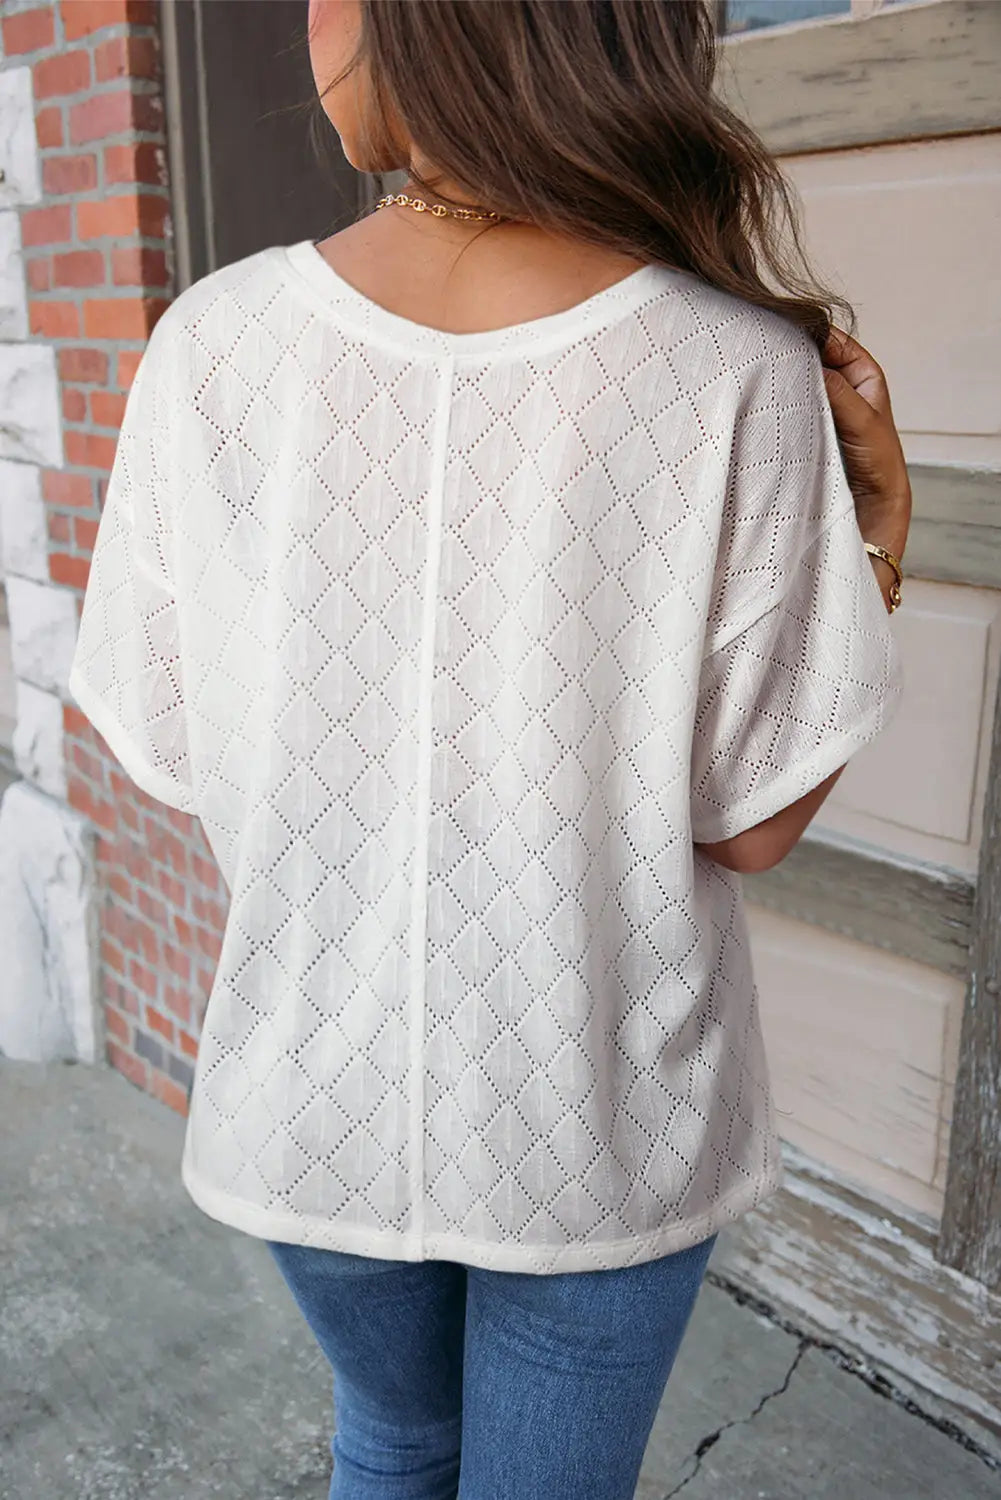 White v neck knitted flowy blouse - blouses & shirts